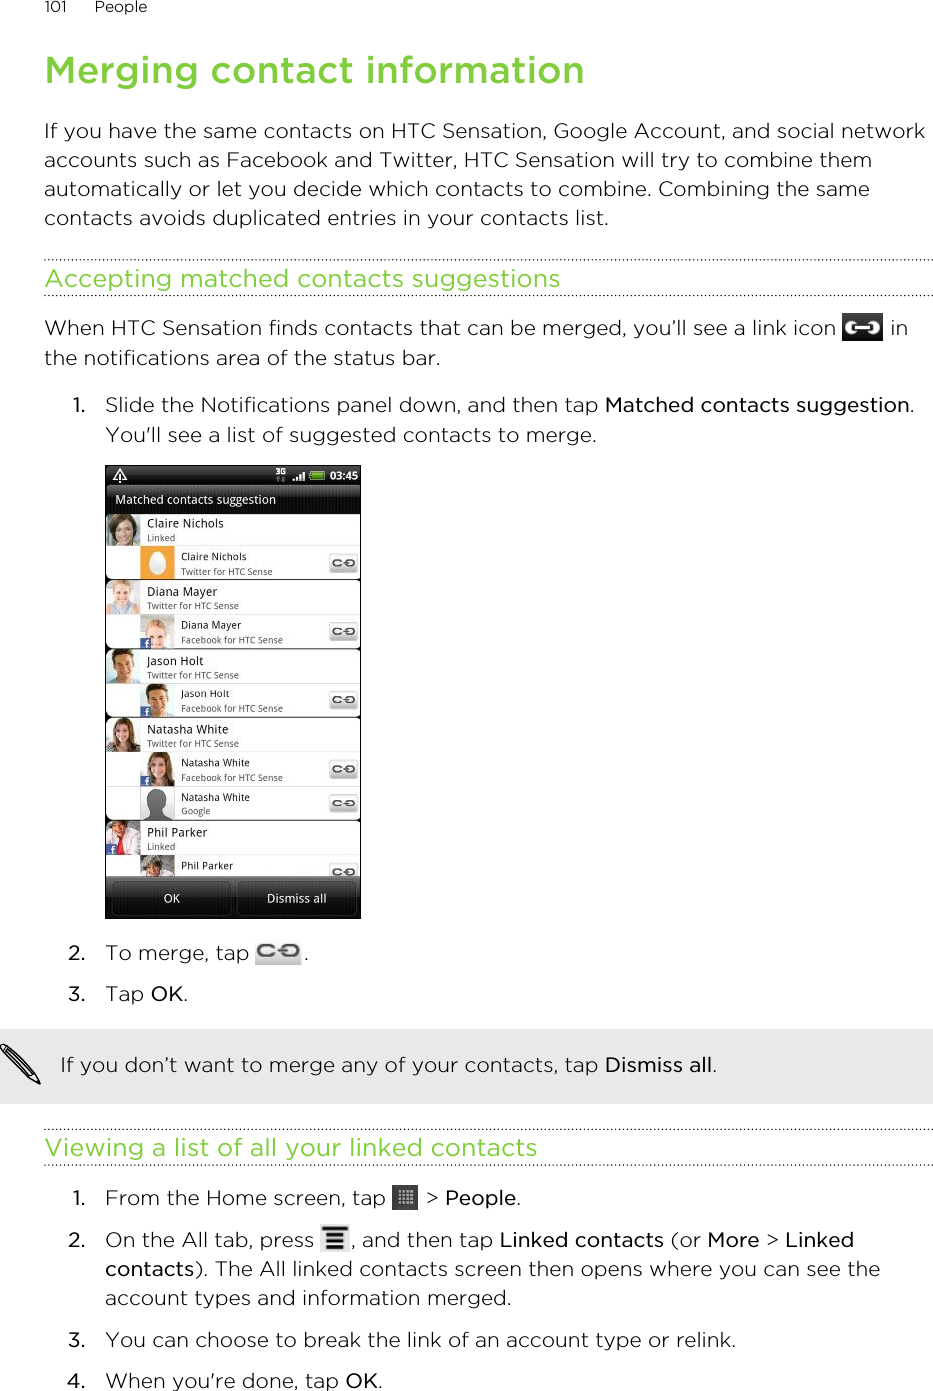 Merging contact informationIf you have the same contacts on HTC Sensation, Google Account, and social networkaccounts such as Facebook and Twitter, HTC Sensation will try to combine themautomatically or let you decide which contacts to combine. Combining the samecontacts avoids duplicated entries in your contacts list.Accepting matched contacts suggestionsWhen HTC Sensation finds contacts that can be merged, you’ll see a link icon   inthe notifications area of the status bar.1. Slide the Notifications panel down, and then tap Matched contacts suggestion.You&apos;ll see a list of suggested contacts to merge.2. To merge, tap  .3. Tap OK.If you don’t want to merge any of your contacts, tap Dismiss all.Viewing a list of all your linked contacts1. From the Home screen, tap   &gt; People.2. On the All tab, press  , and then tap Linked contacts (or More &gt; Linkedcontacts). The All linked contacts screen then opens where you can see theaccount types and information merged.3. You can choose to break the link of an account type or relink.4. When you&apos;re done, tap OK.101 People